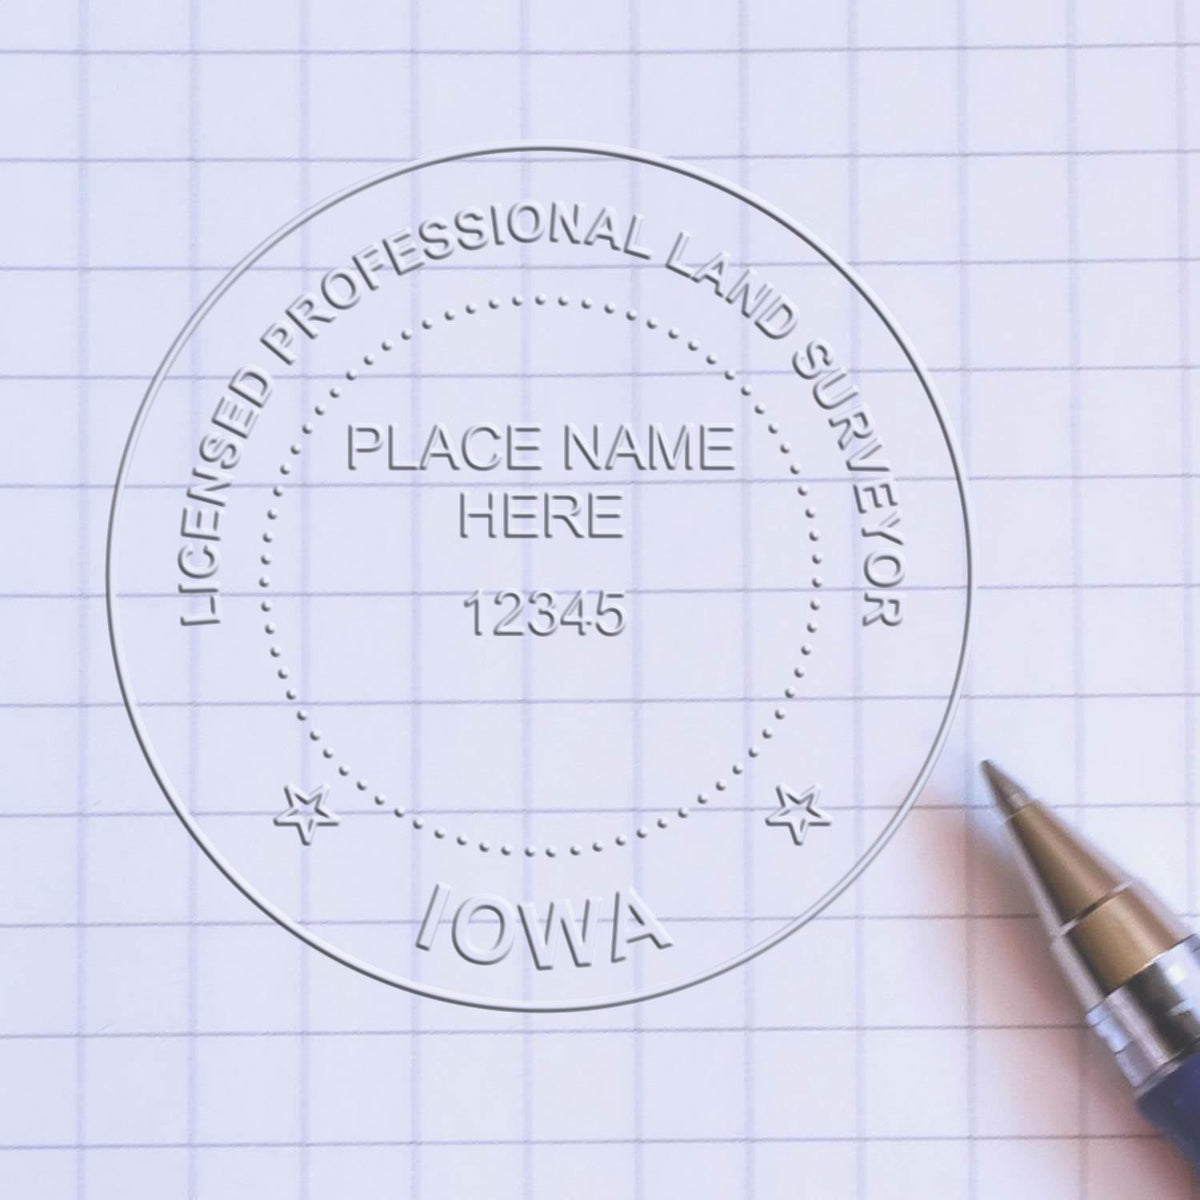 The Gift Iowa Land Surveyor Seal stamp impression comes to life with a crisp, detailed image stamped on paper - showcasing true professional quality.